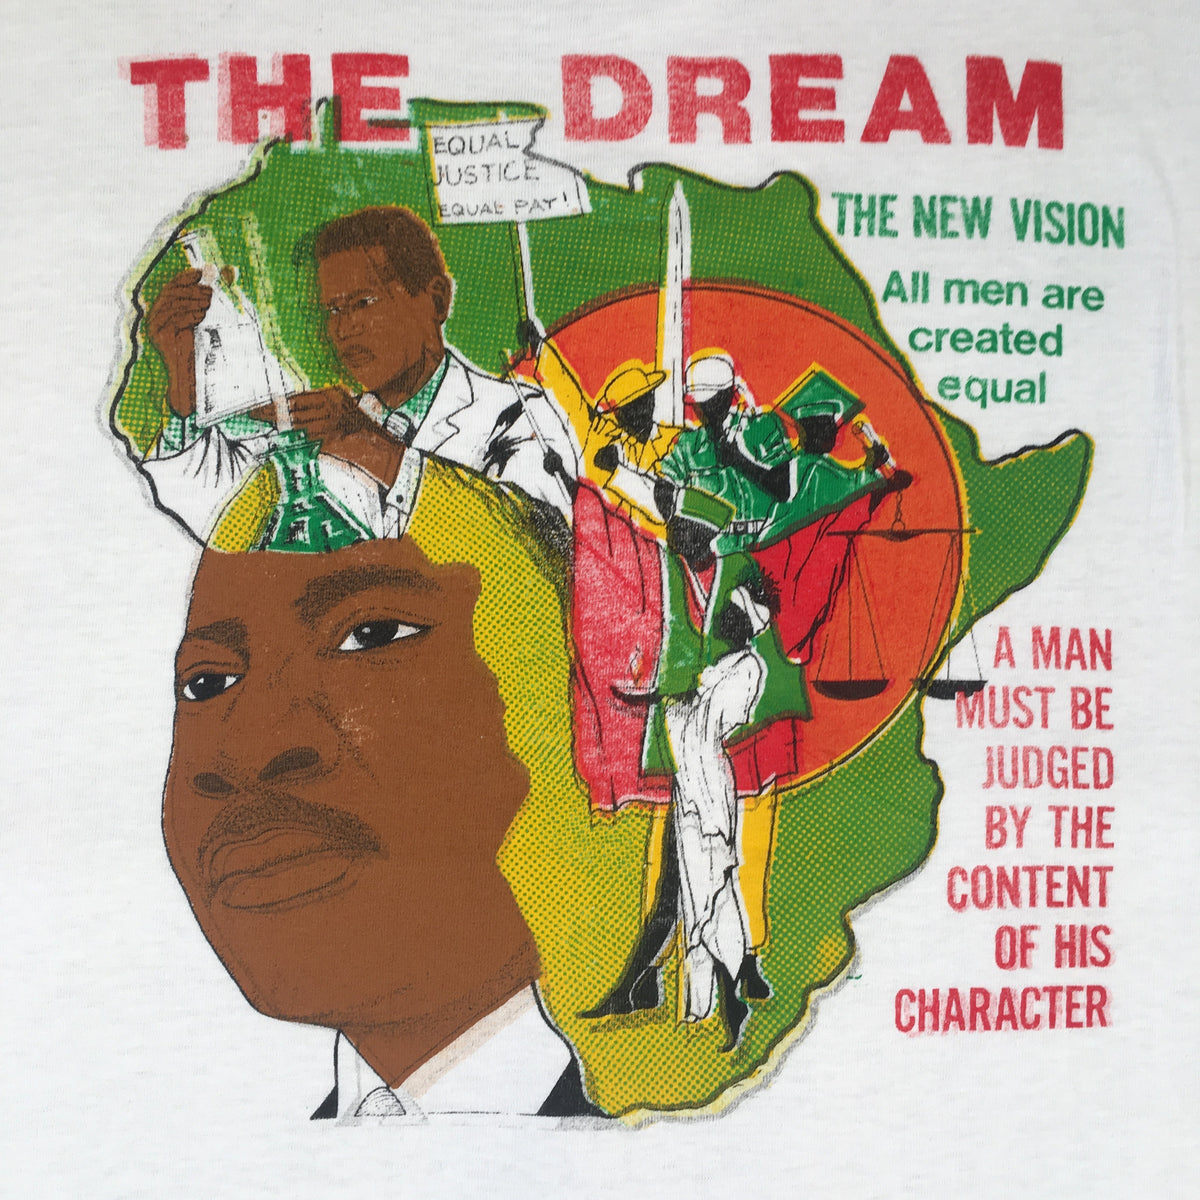 Vintage The Dream &quot;All Men Are Created Equal&quot; T-Shirt - jointcustodydc